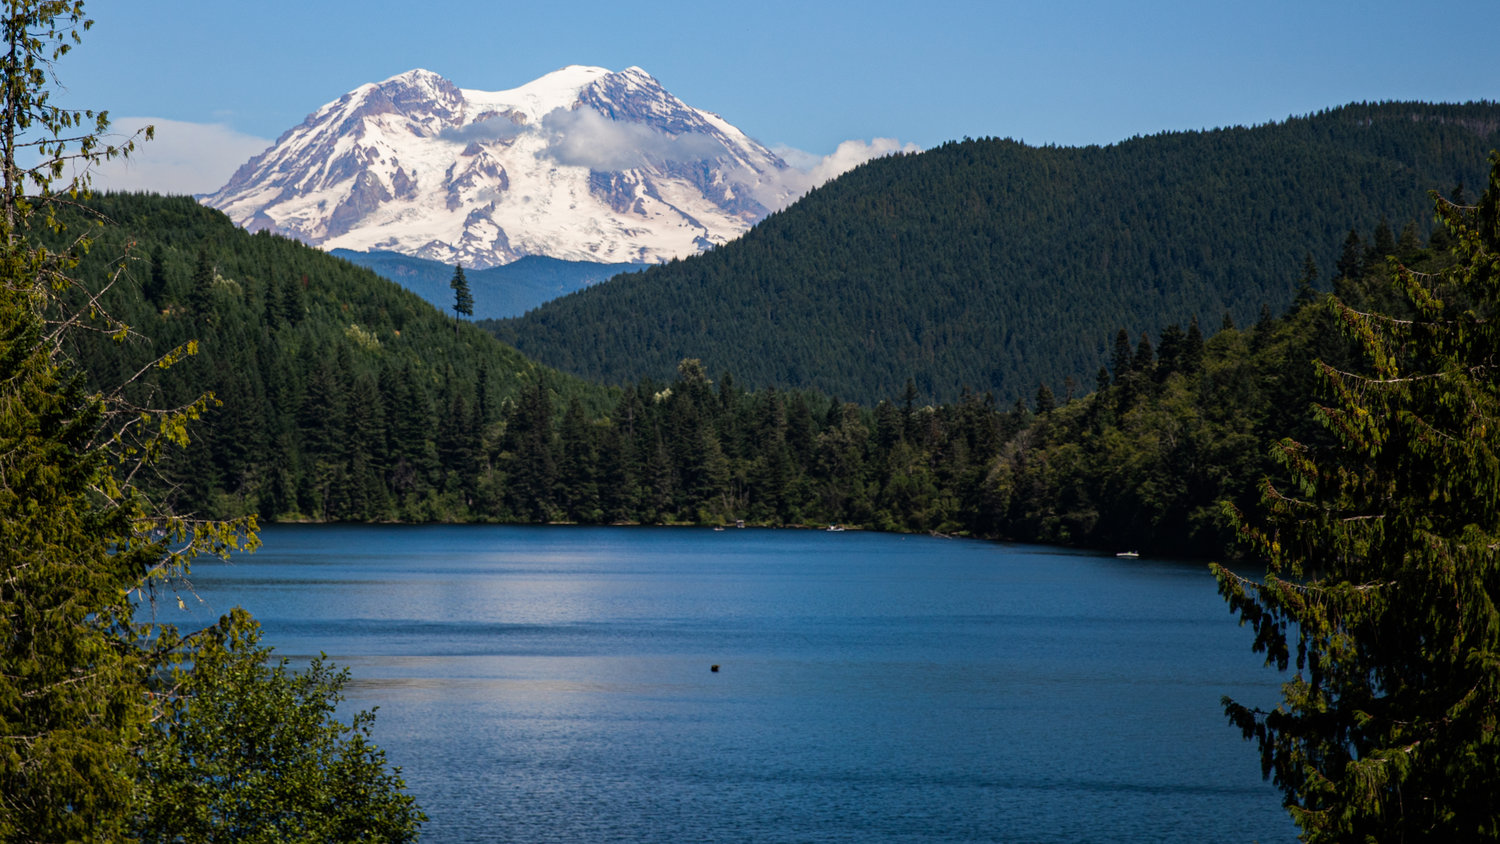 Mount Rainier towers over Mineral Lake on Sunday.